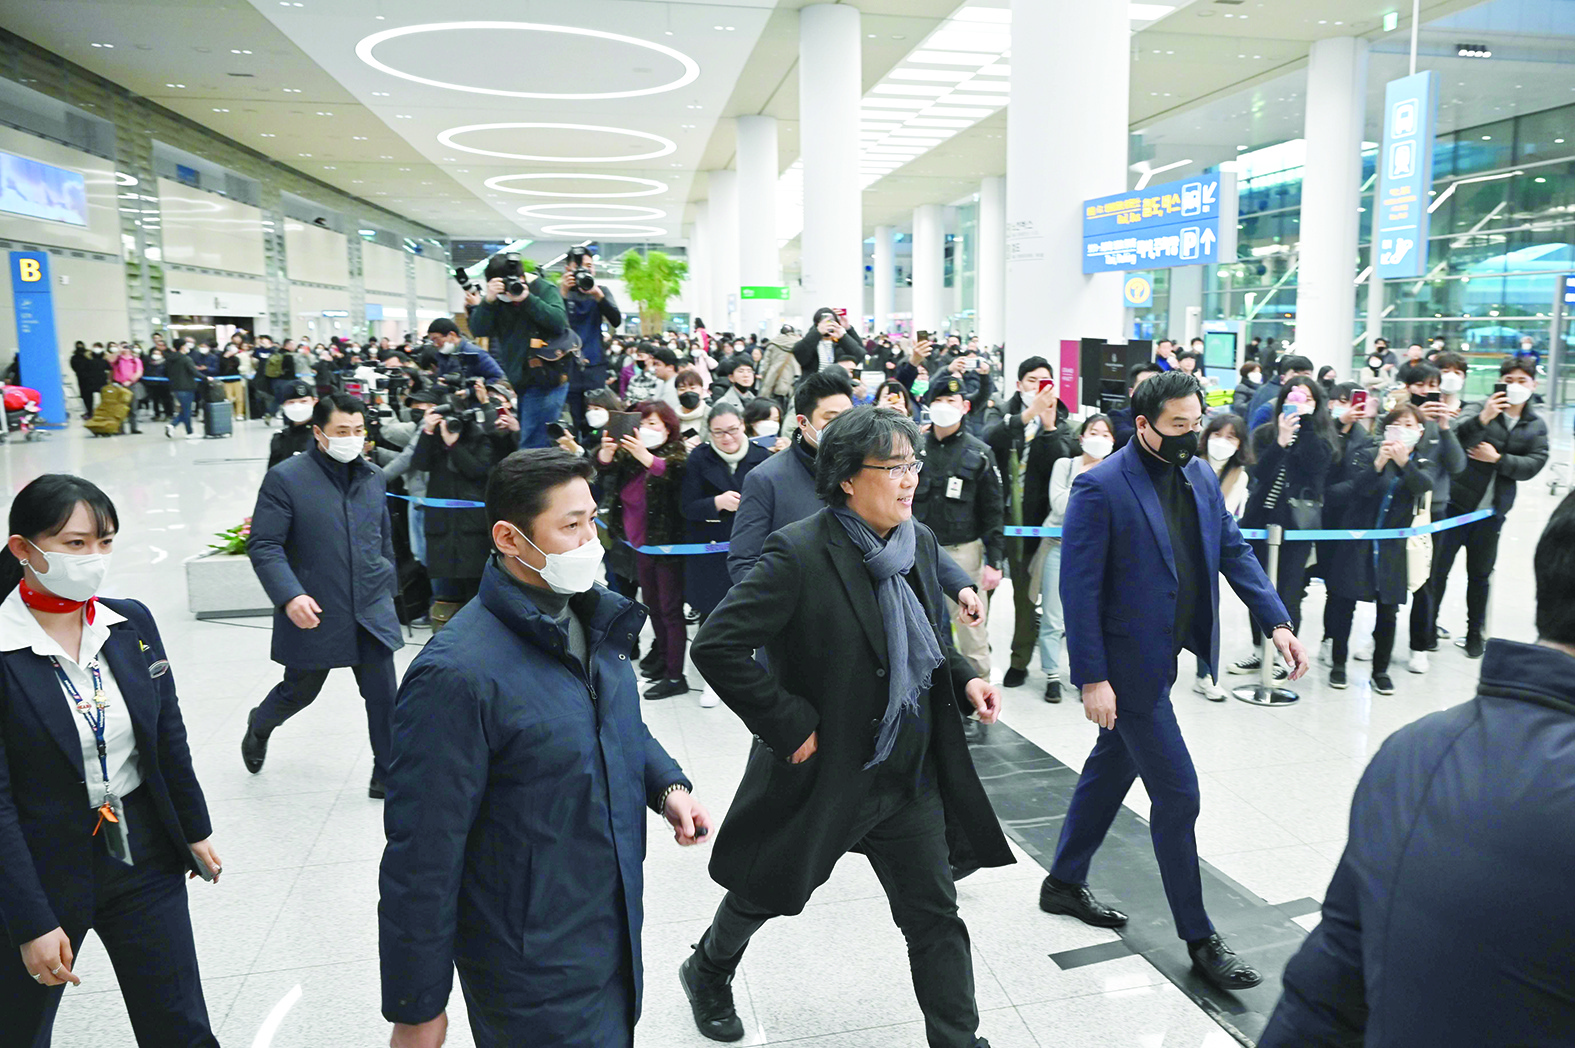 South Korean director Bong Joon-ho (centre R) walks past the media upon his arrival at Incheon airport, west of Seoul, on February 16, 2020 after his film Parasite won the Oscar for Best Picture. - Bong's movie Parasite -- about the widening gap between rich and poor -- became the first non-English-language film to win Hollywood's biggest prize on February 10, prompting celebrations in South Korea. (Photo by Ed JONES / AFP)